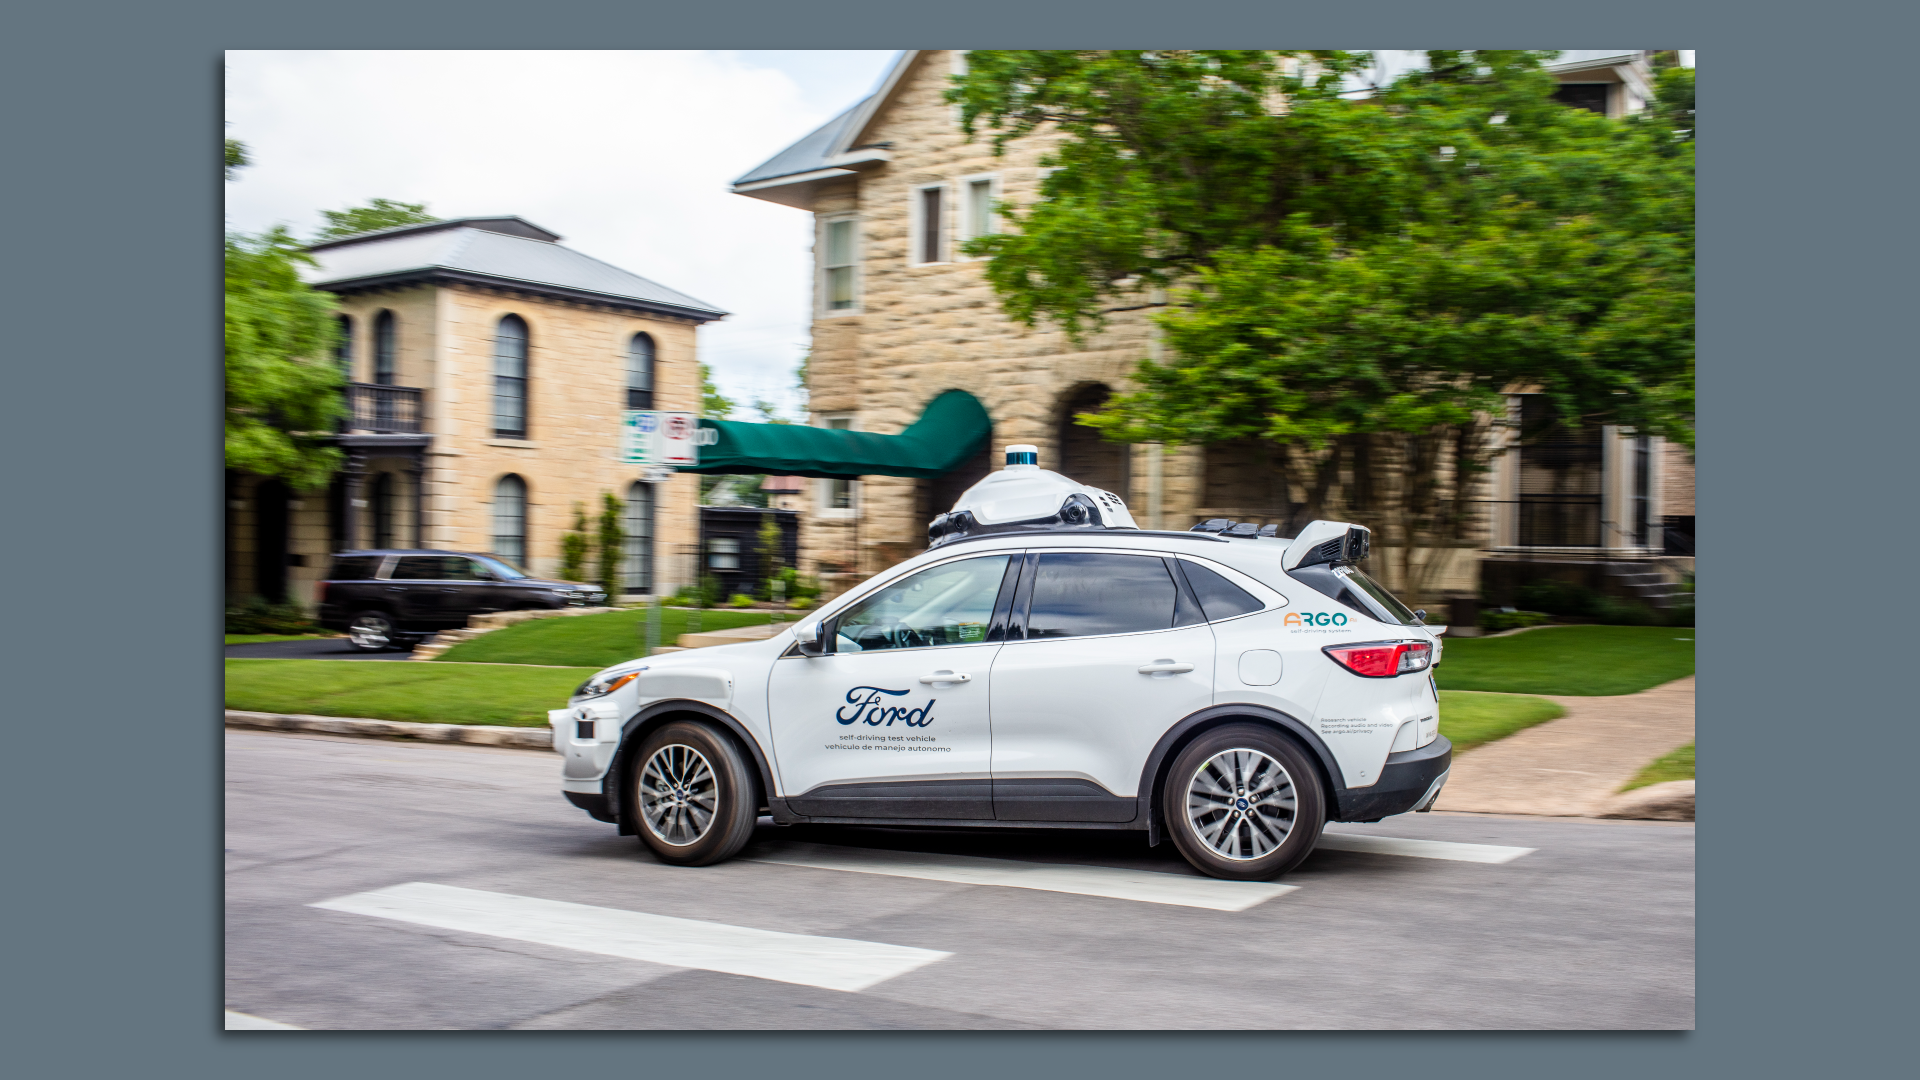 Ford Escape equipped with Argo AI's autonomous driving technology. 